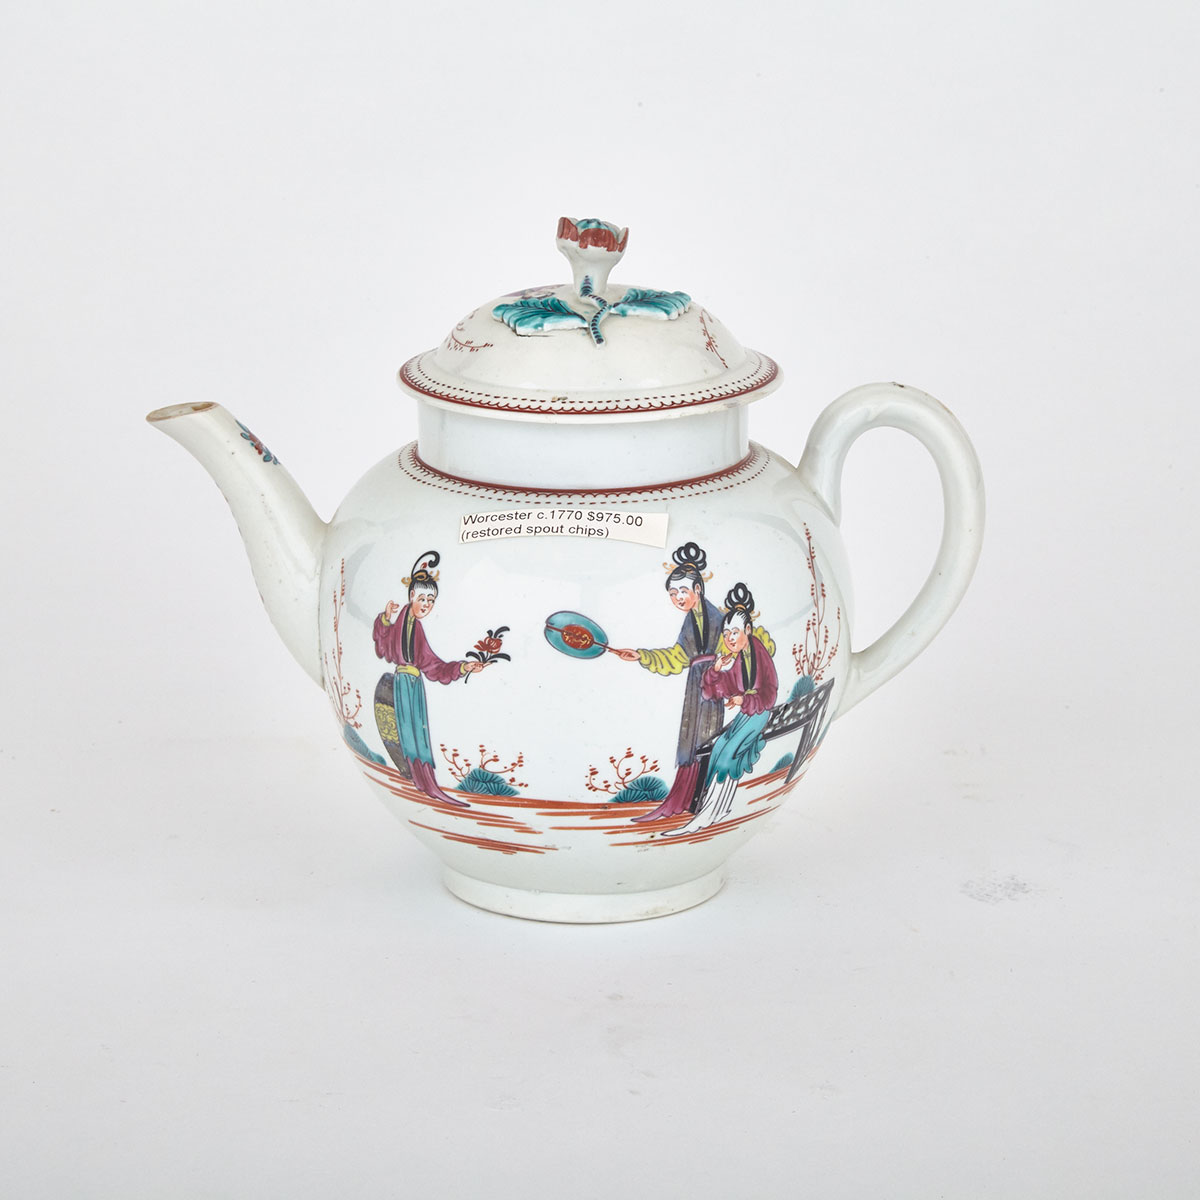 Worcester Chinese Figures Teapot, c.1770